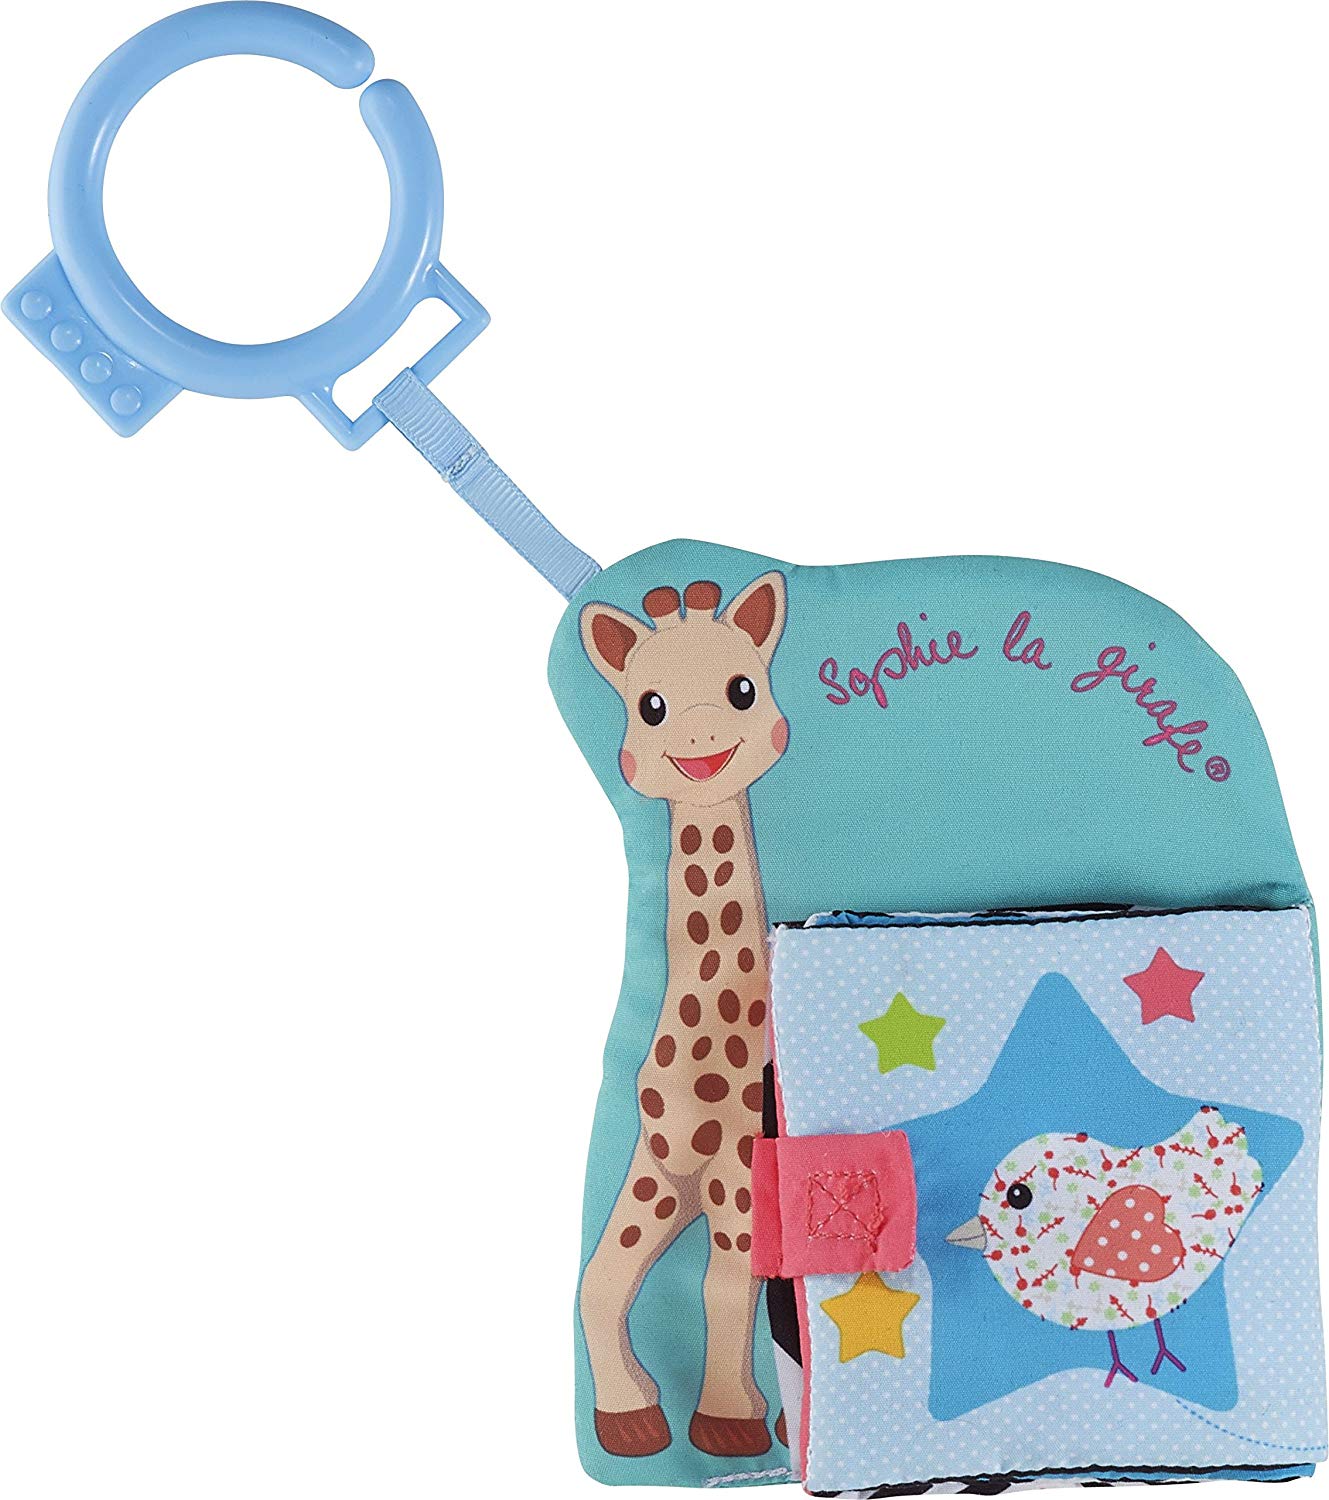 Sophie la girafe Clip-on Book Baby Activity and Development Toy